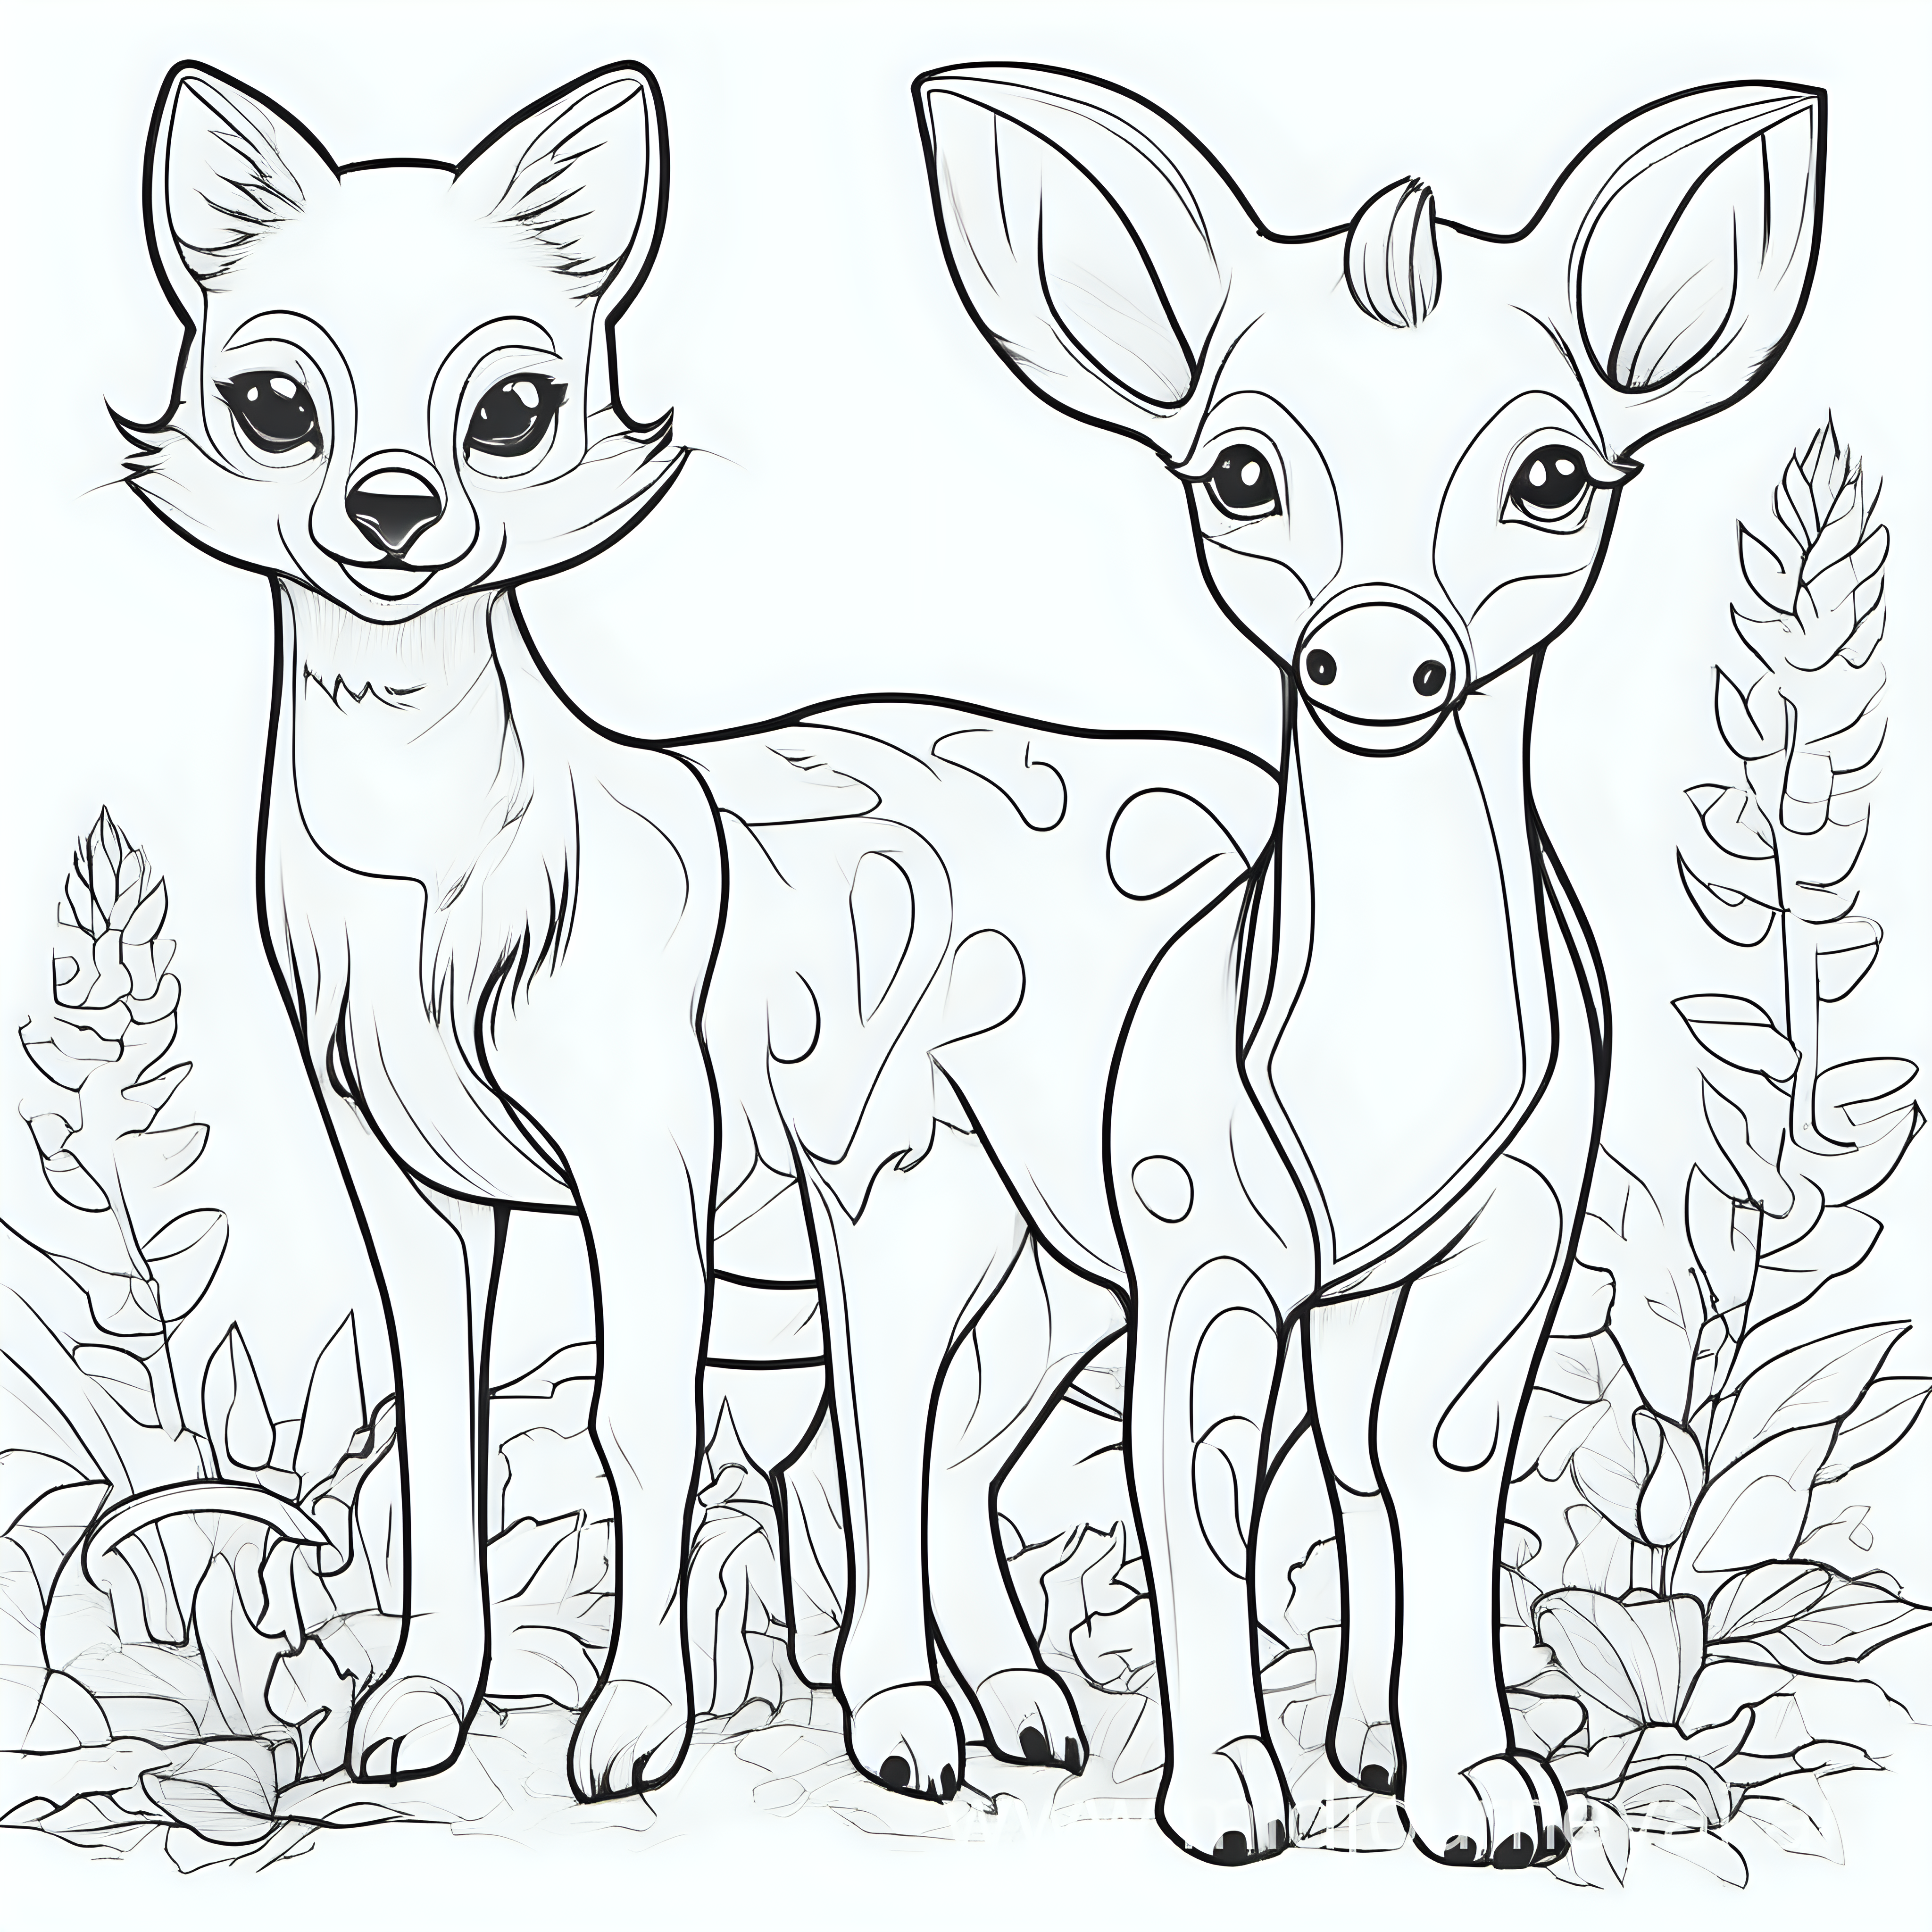 draw cute animals with only the outline in back for a coloring book